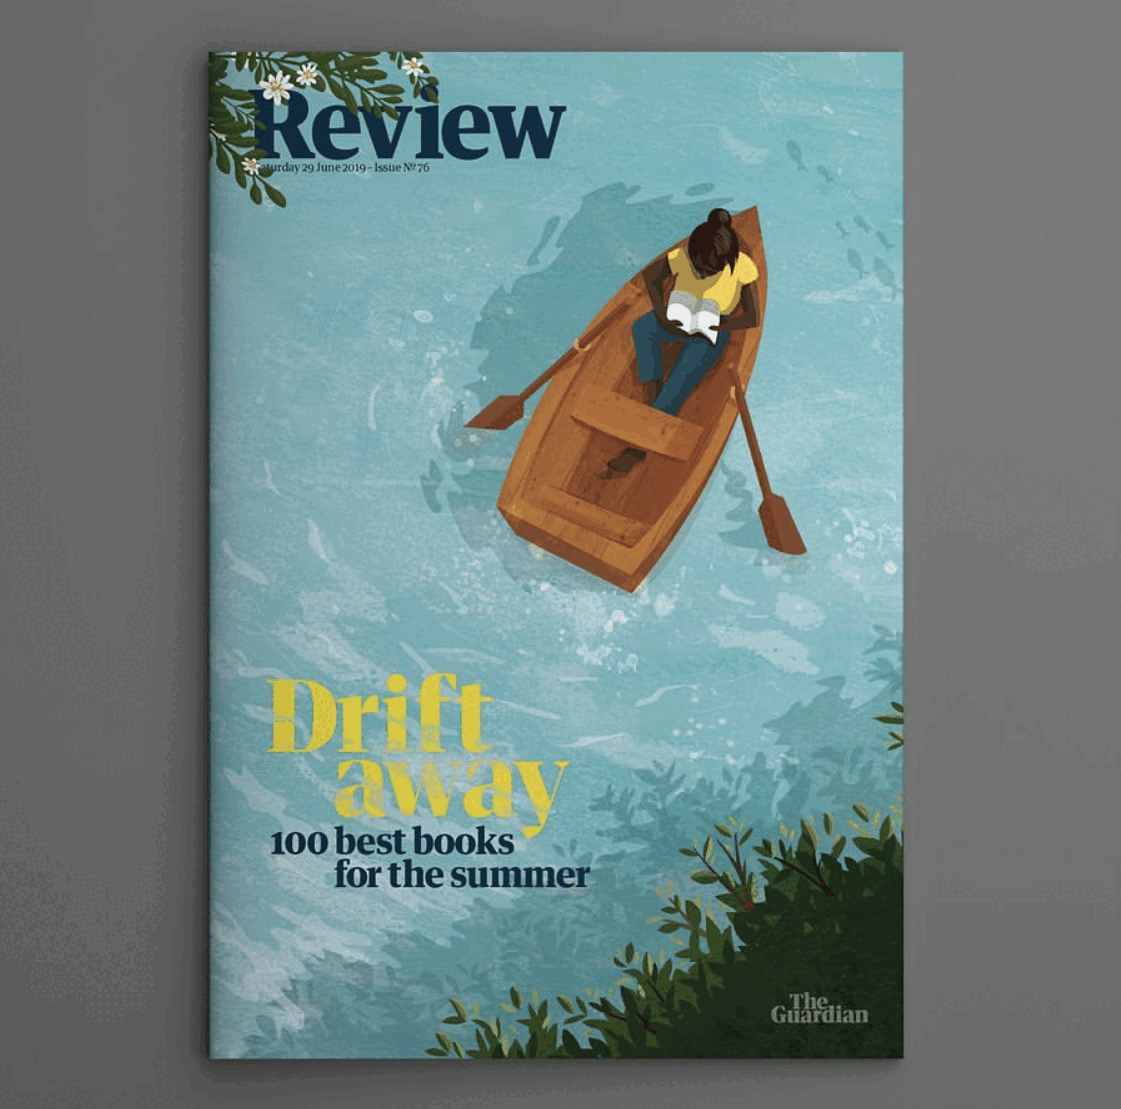 Kerry Hyndman, Drift Away editorial relaxing illustration of a boat and female character by Kerry Hyndman